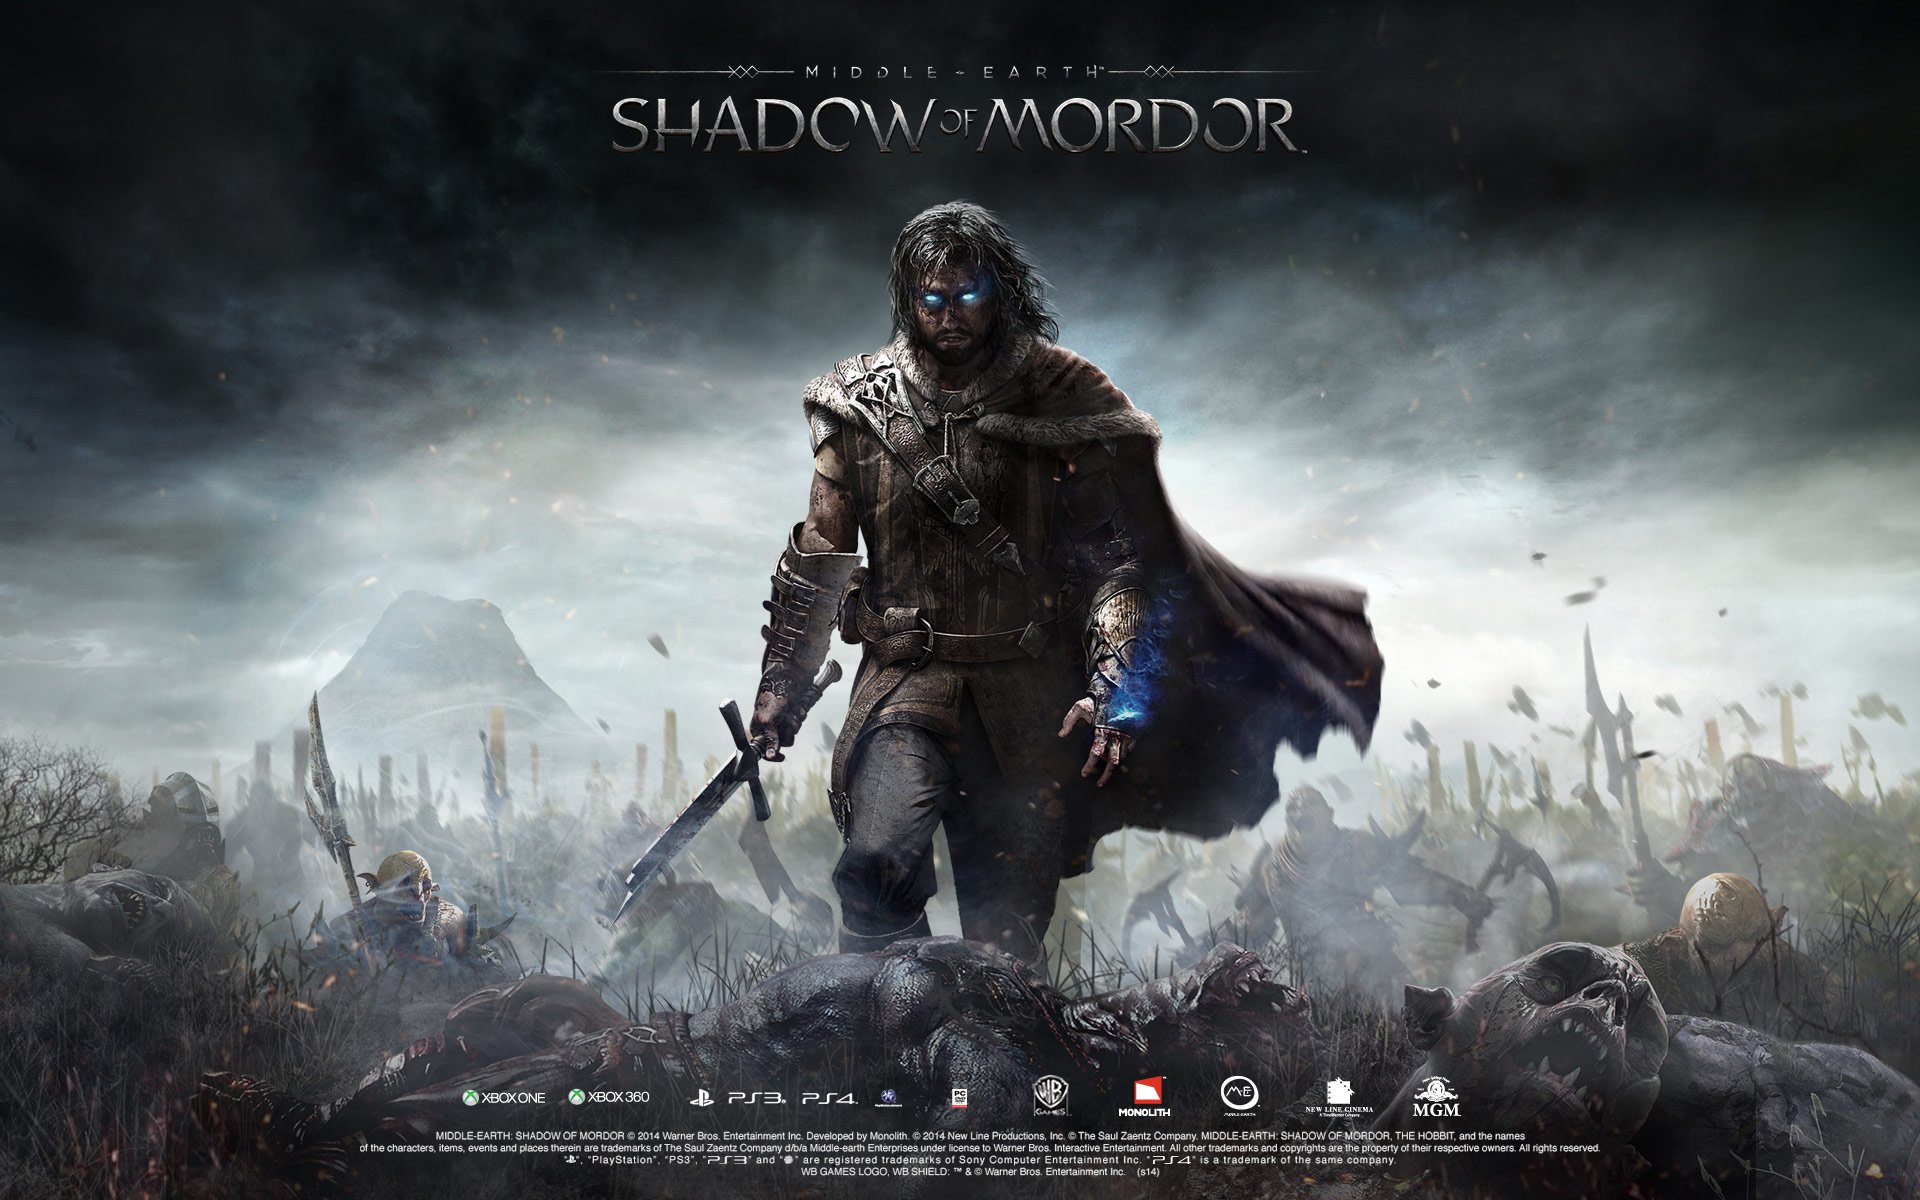 middle, Earth, Shadow, Mordor, Fantasy, Adventure, Action, Lotr, Online, Lord, Rings, Warrior, Poster Wallpaper